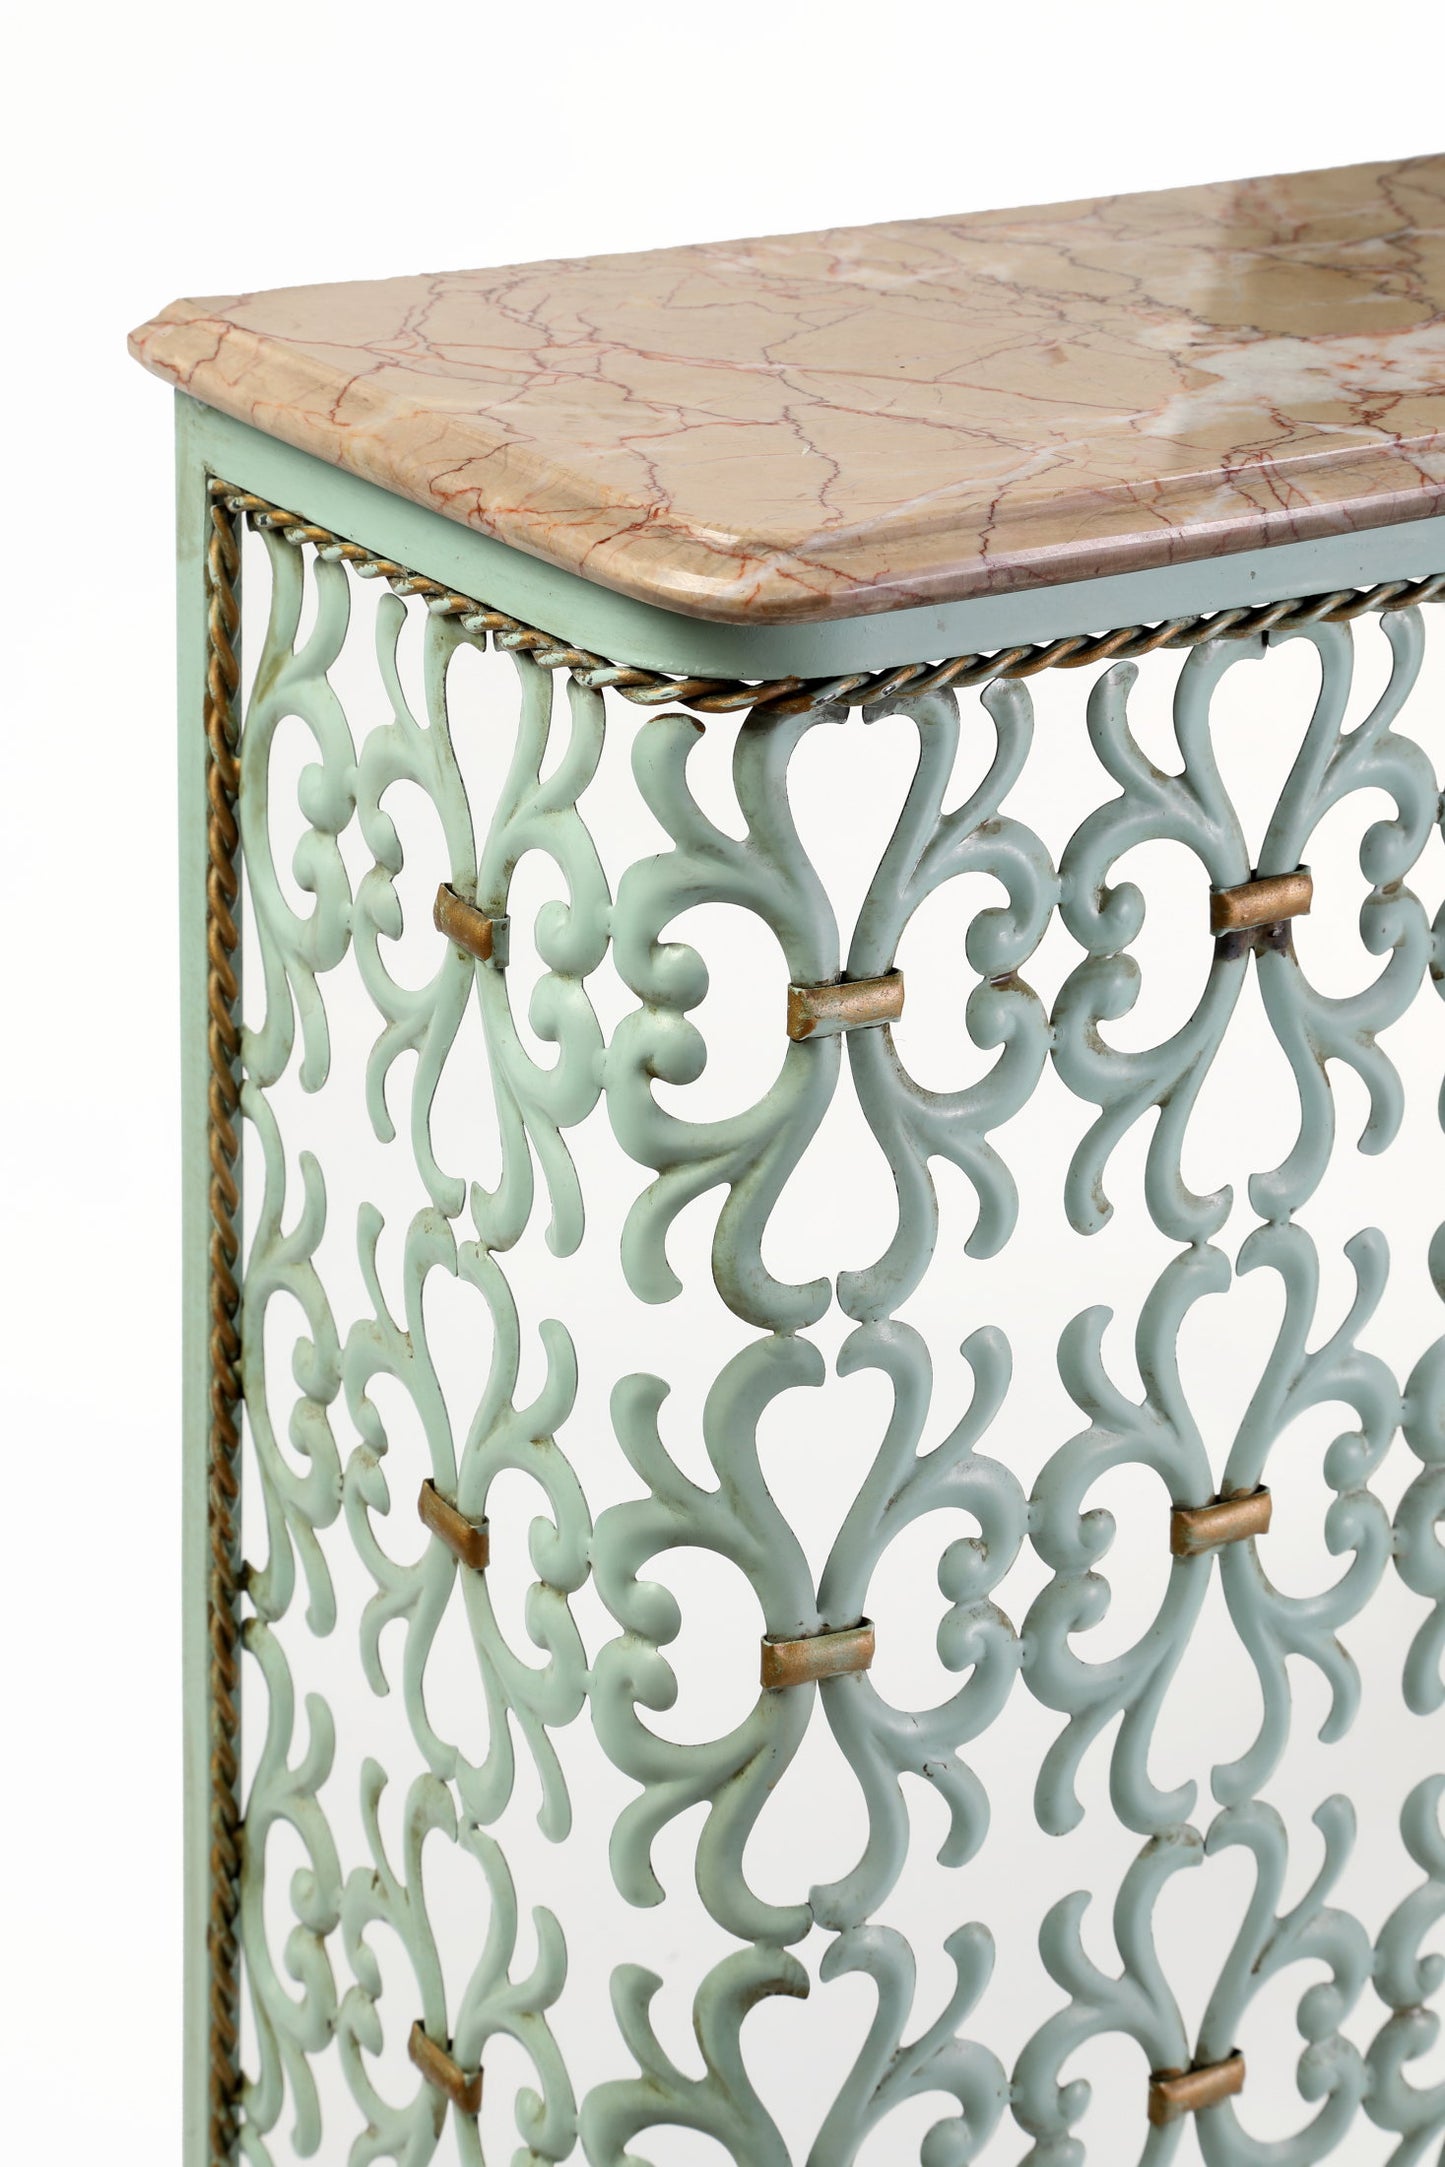 Radiator cover from the 50s light green marble top